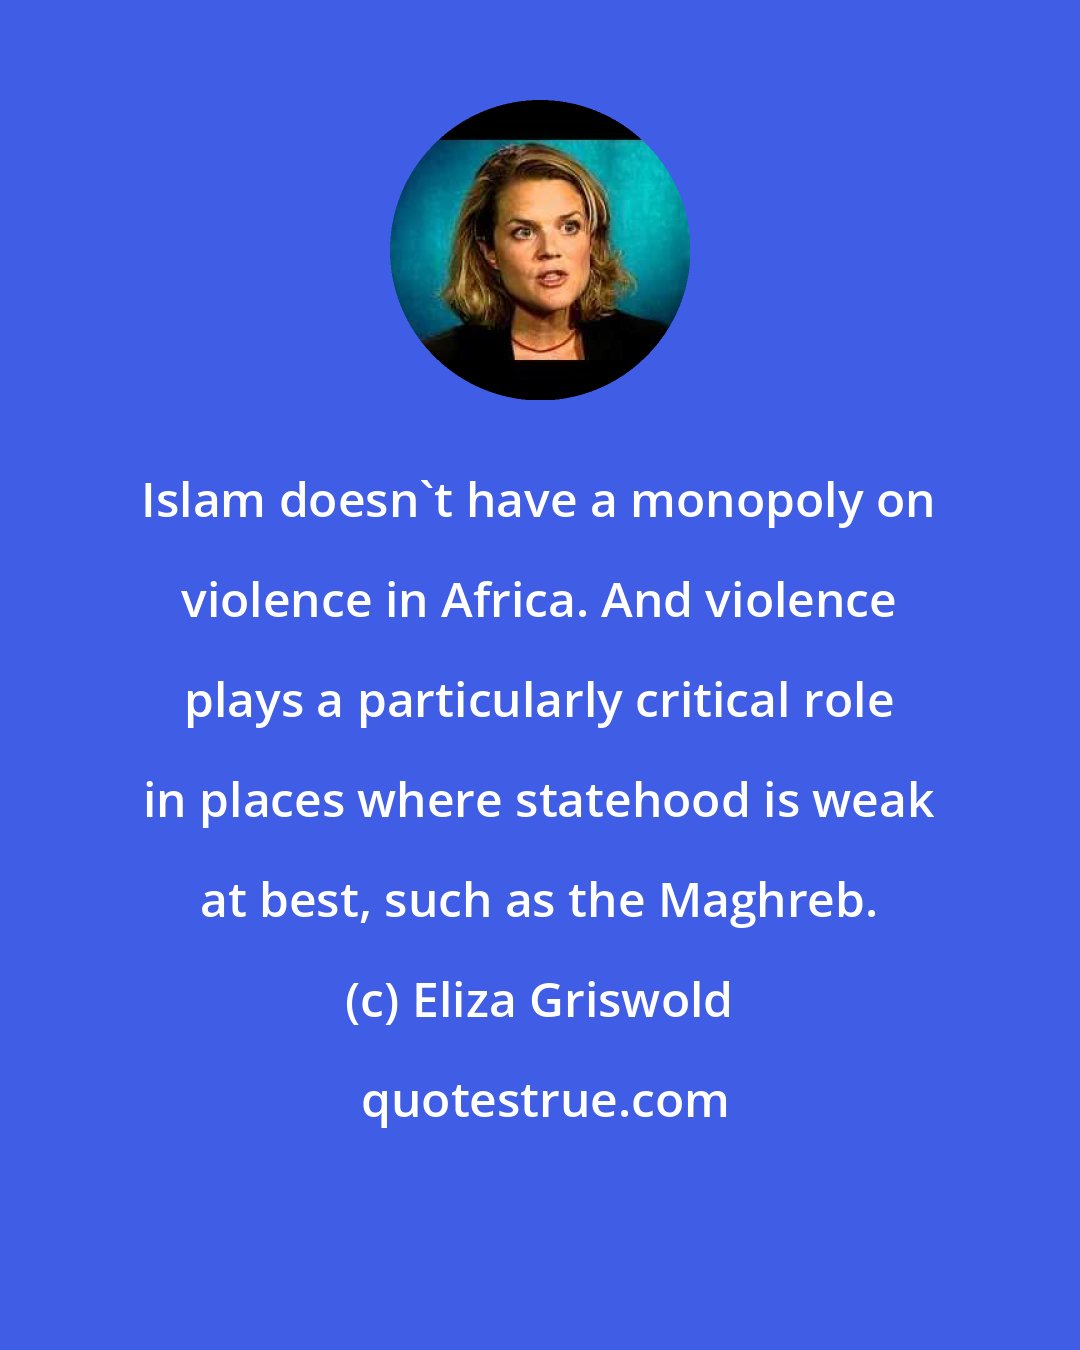 Eliza Griswold: Islam doesn't have a monopoly on violence in Africa. And violence plays a particularly critical role in places where statehood is weak at best, such as the Maghreb.